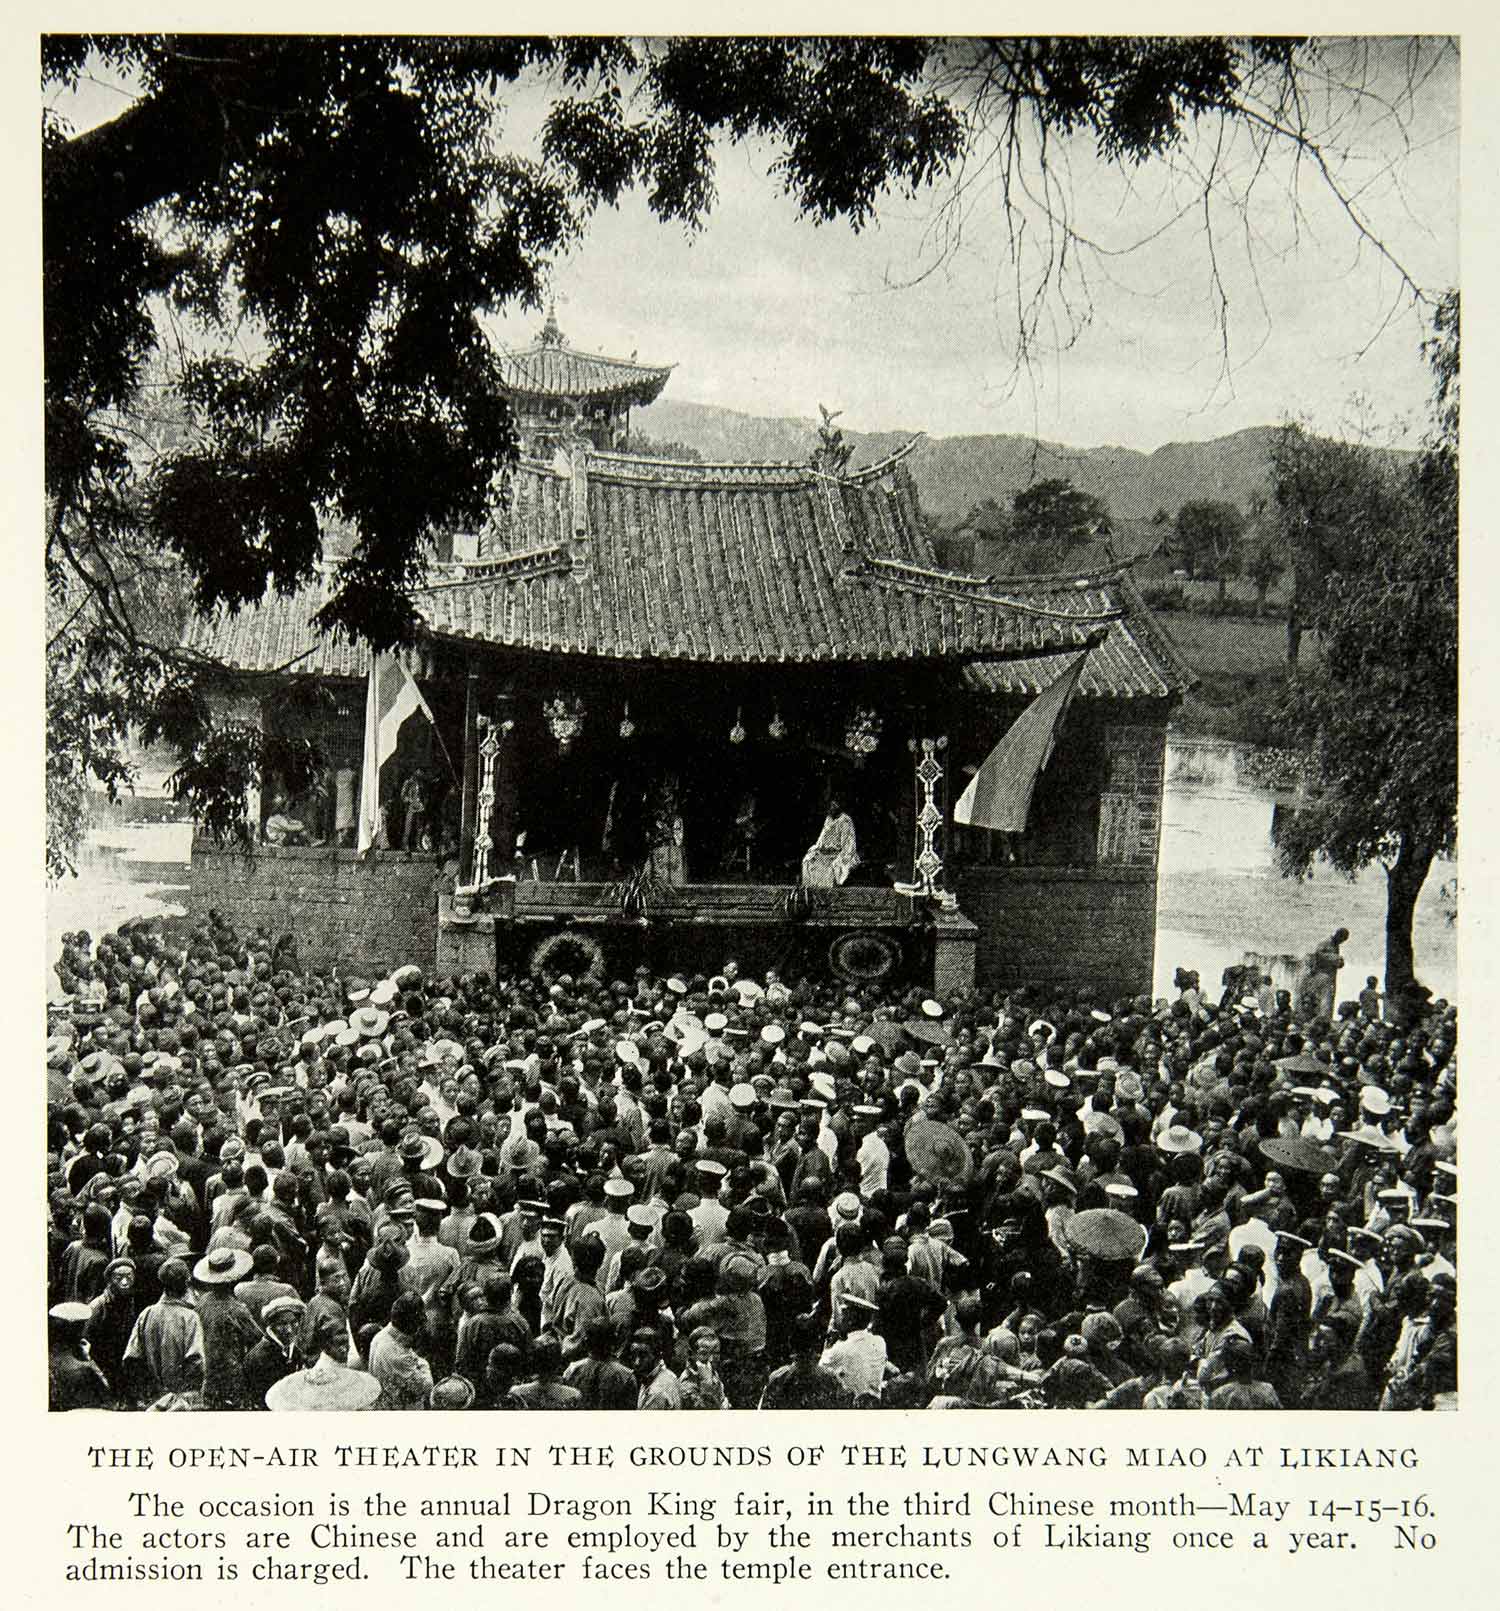 1924 Print Likiang China Town Open Air Theater Performance Historical Image NGM9